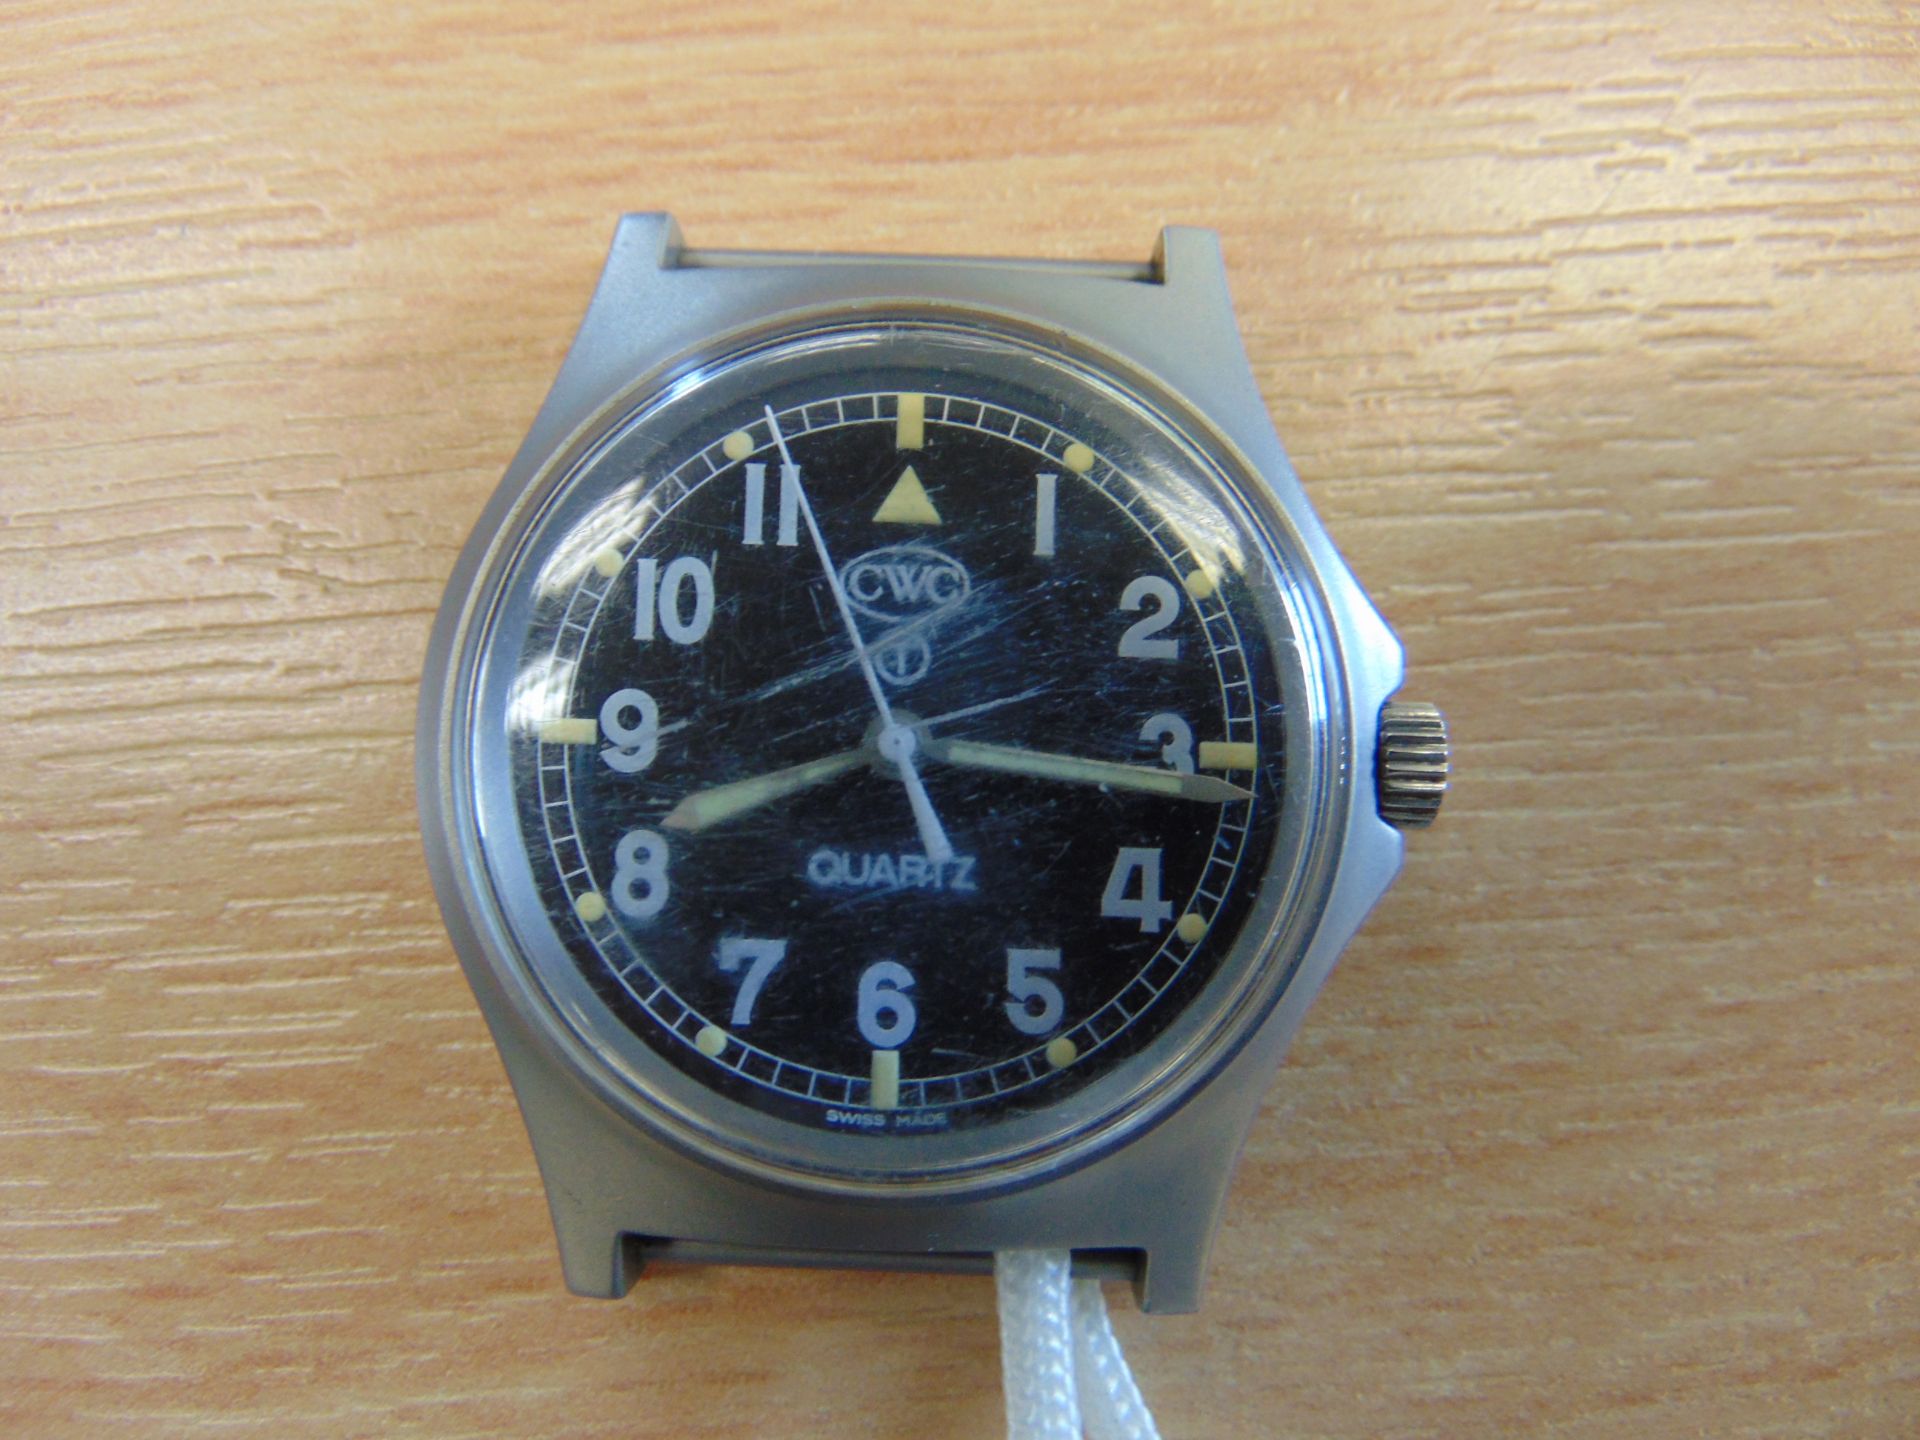 CWC W10 British Army Service Watch Nato Marks, Date 1997 - Image 2 of 5